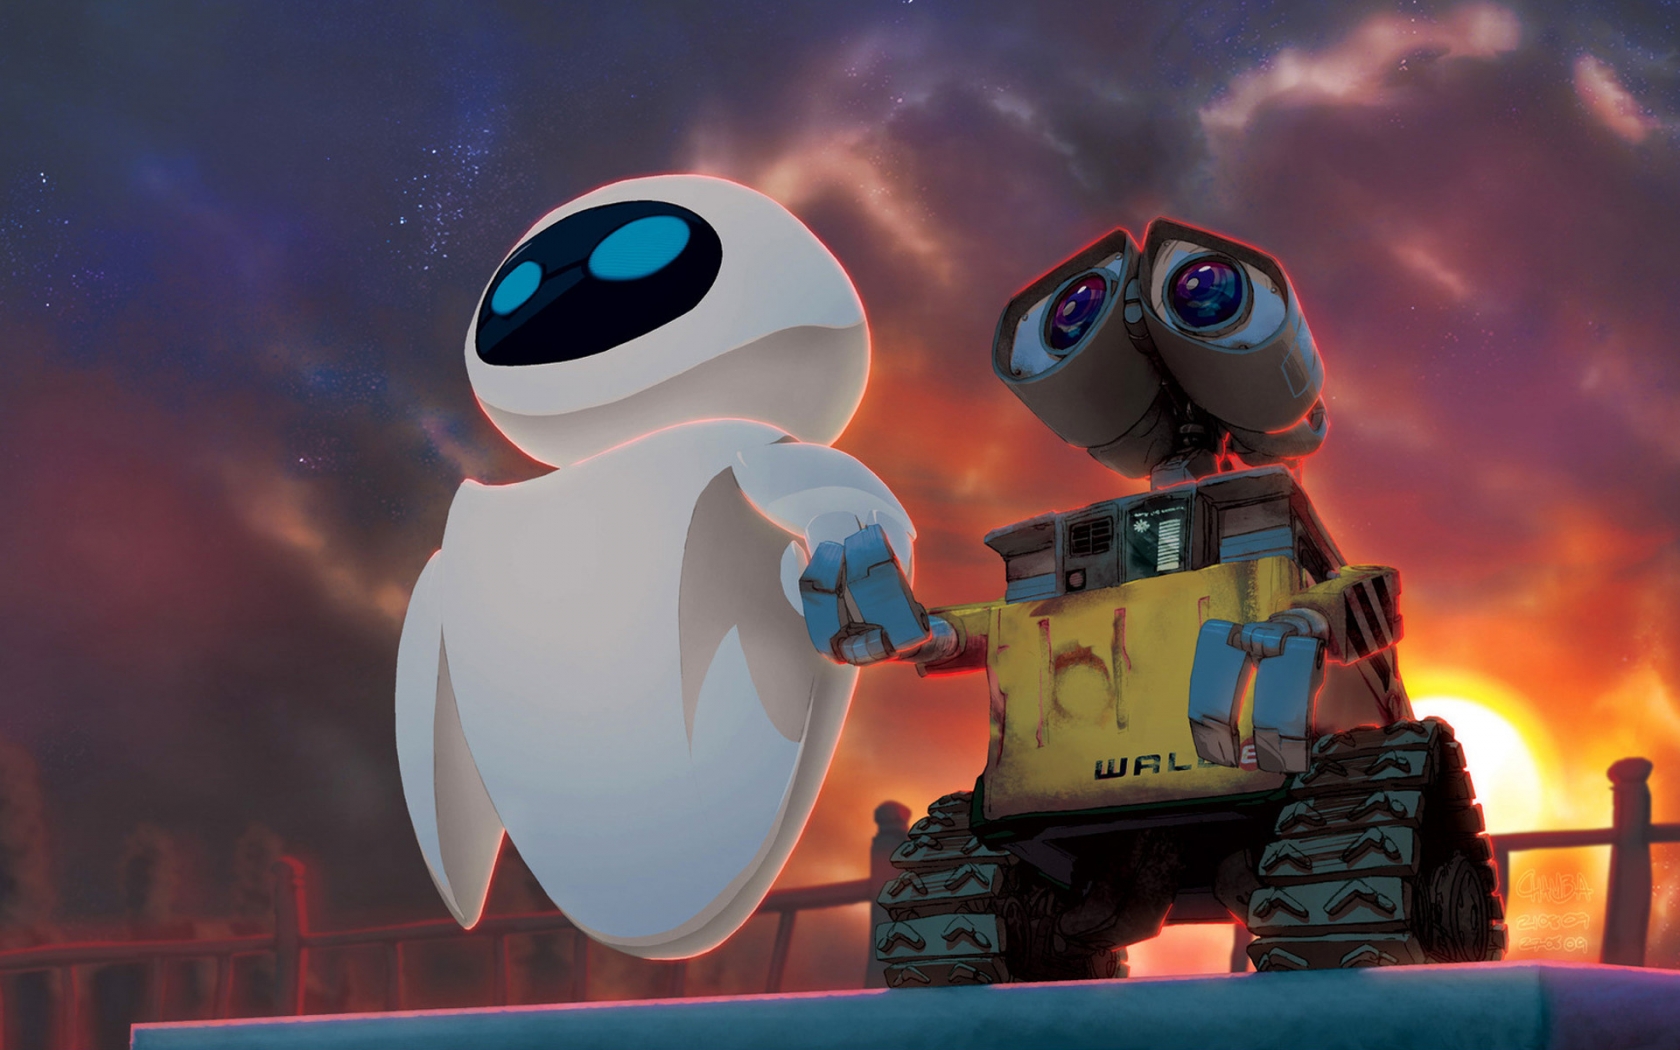 Walle Cartooned for 1680 x 1050 widescreen resolution